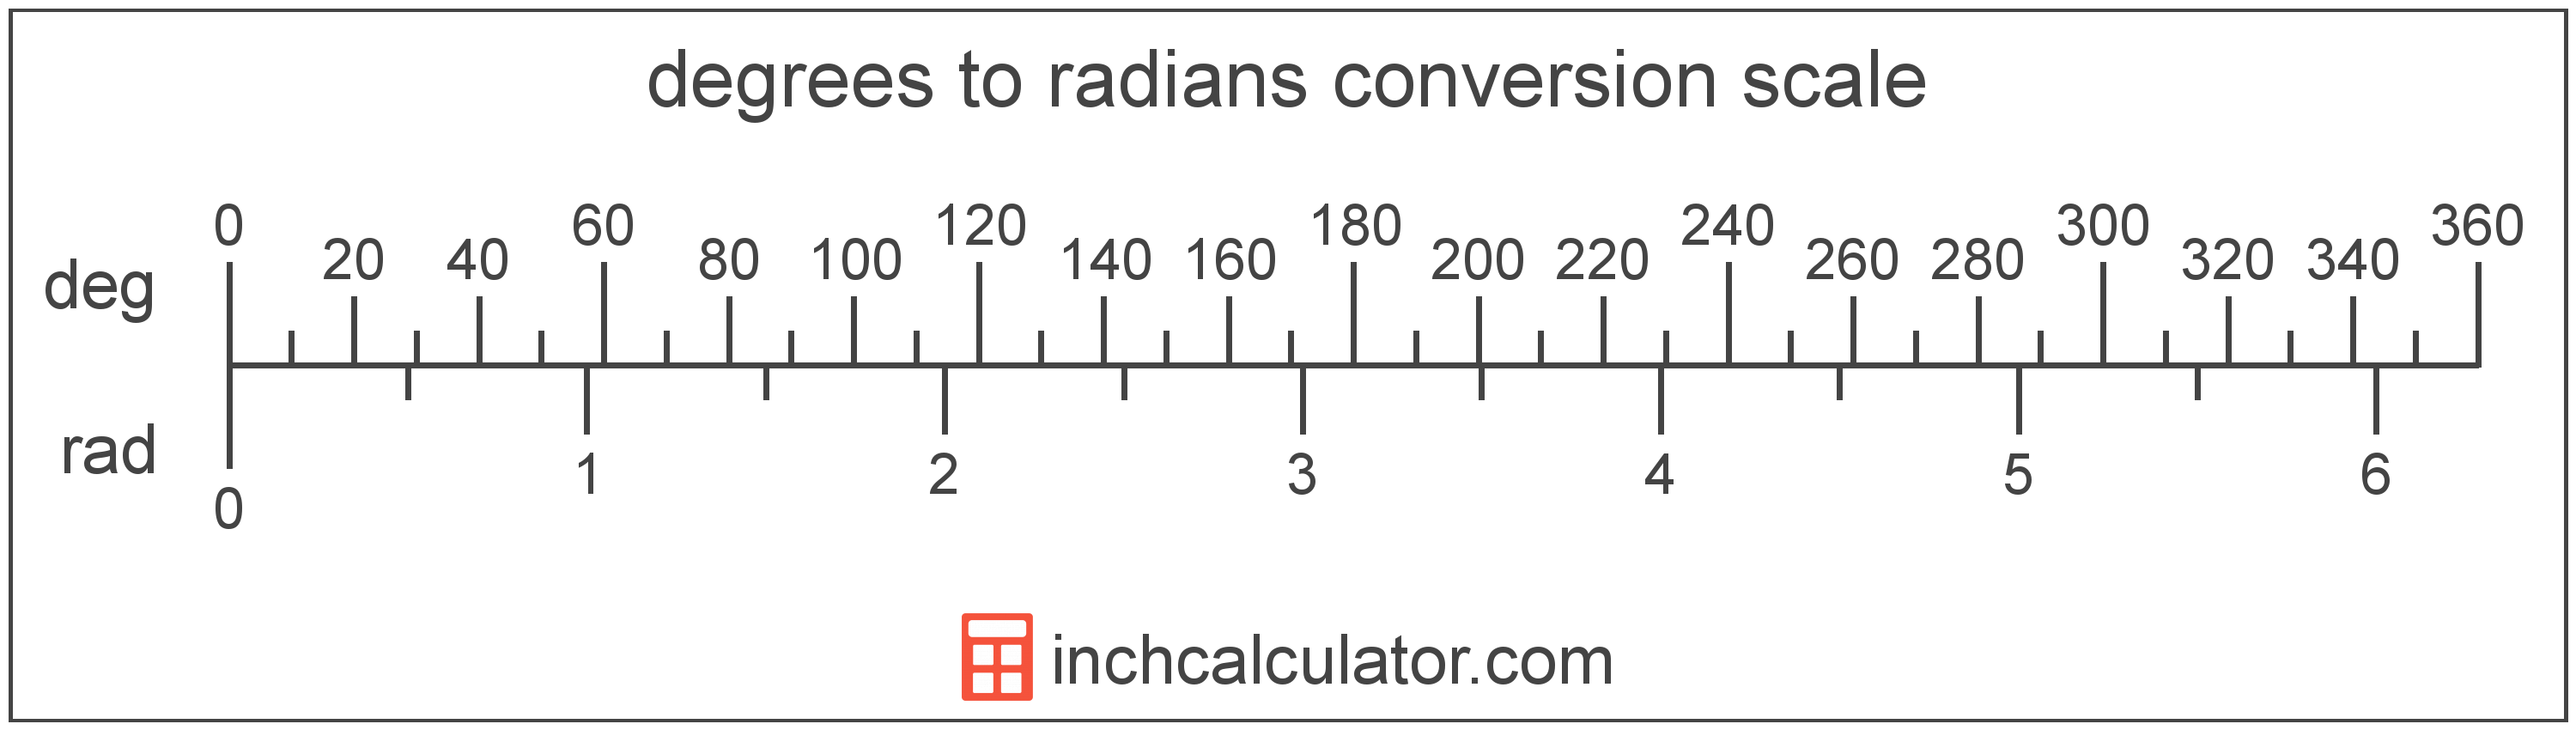 conversion scale showing degrees and equivalent radians angle values